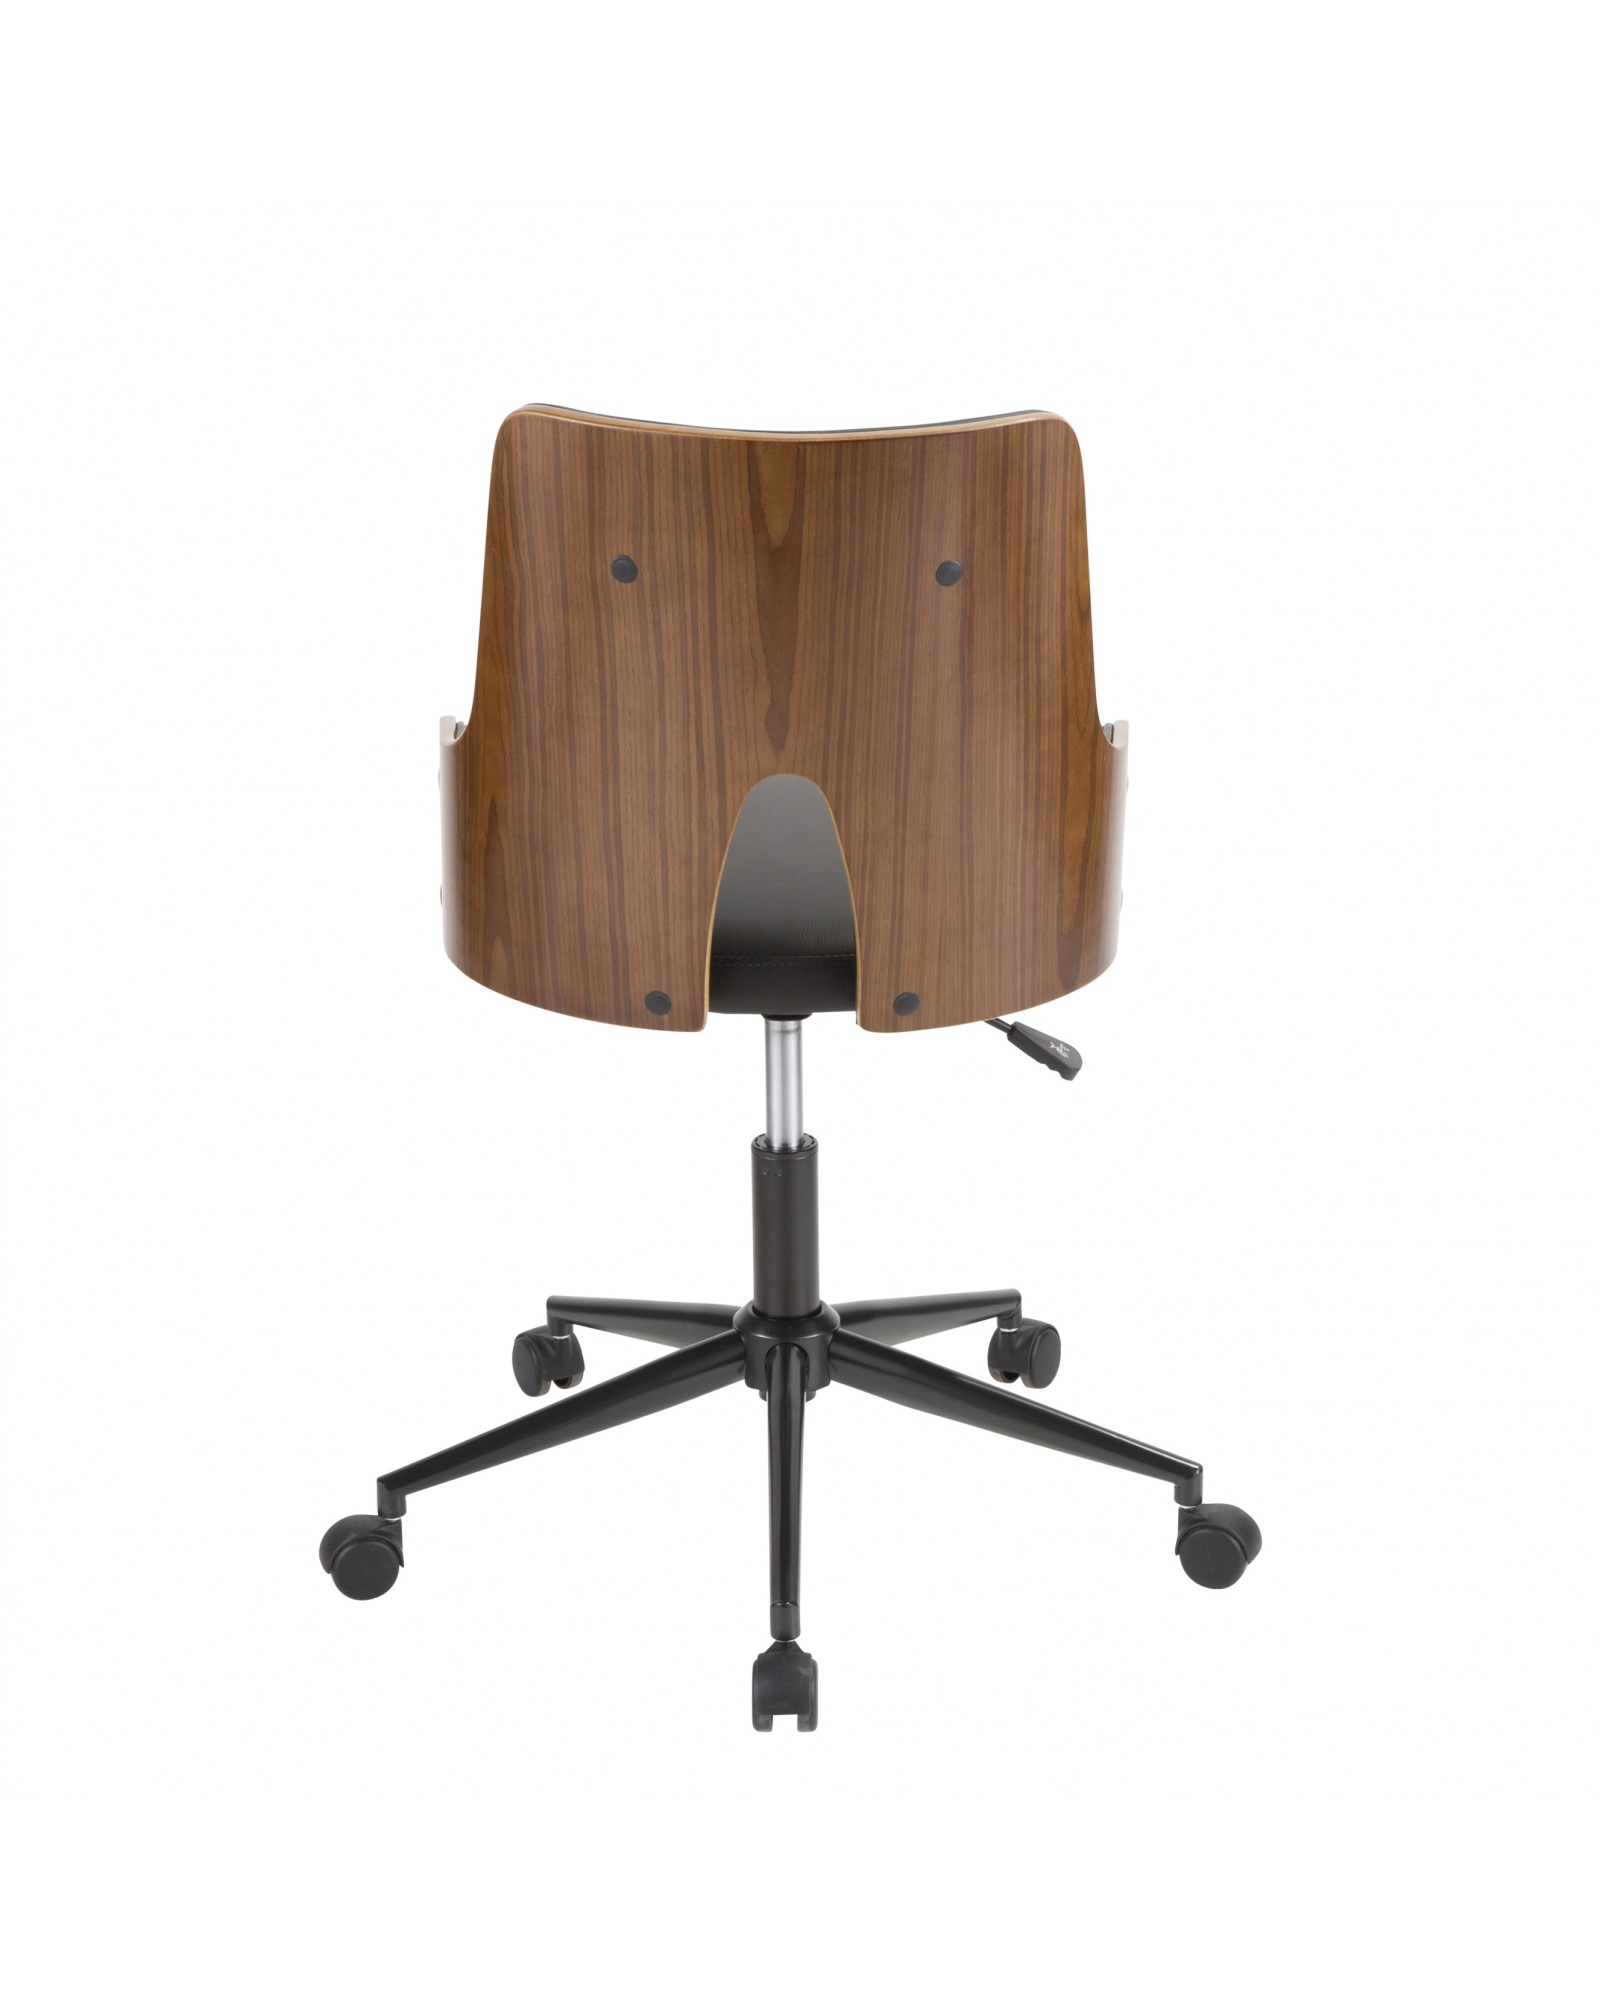 Stella Mid-Century Modern Office Chair in Walnut Wood and Black Faux Leather